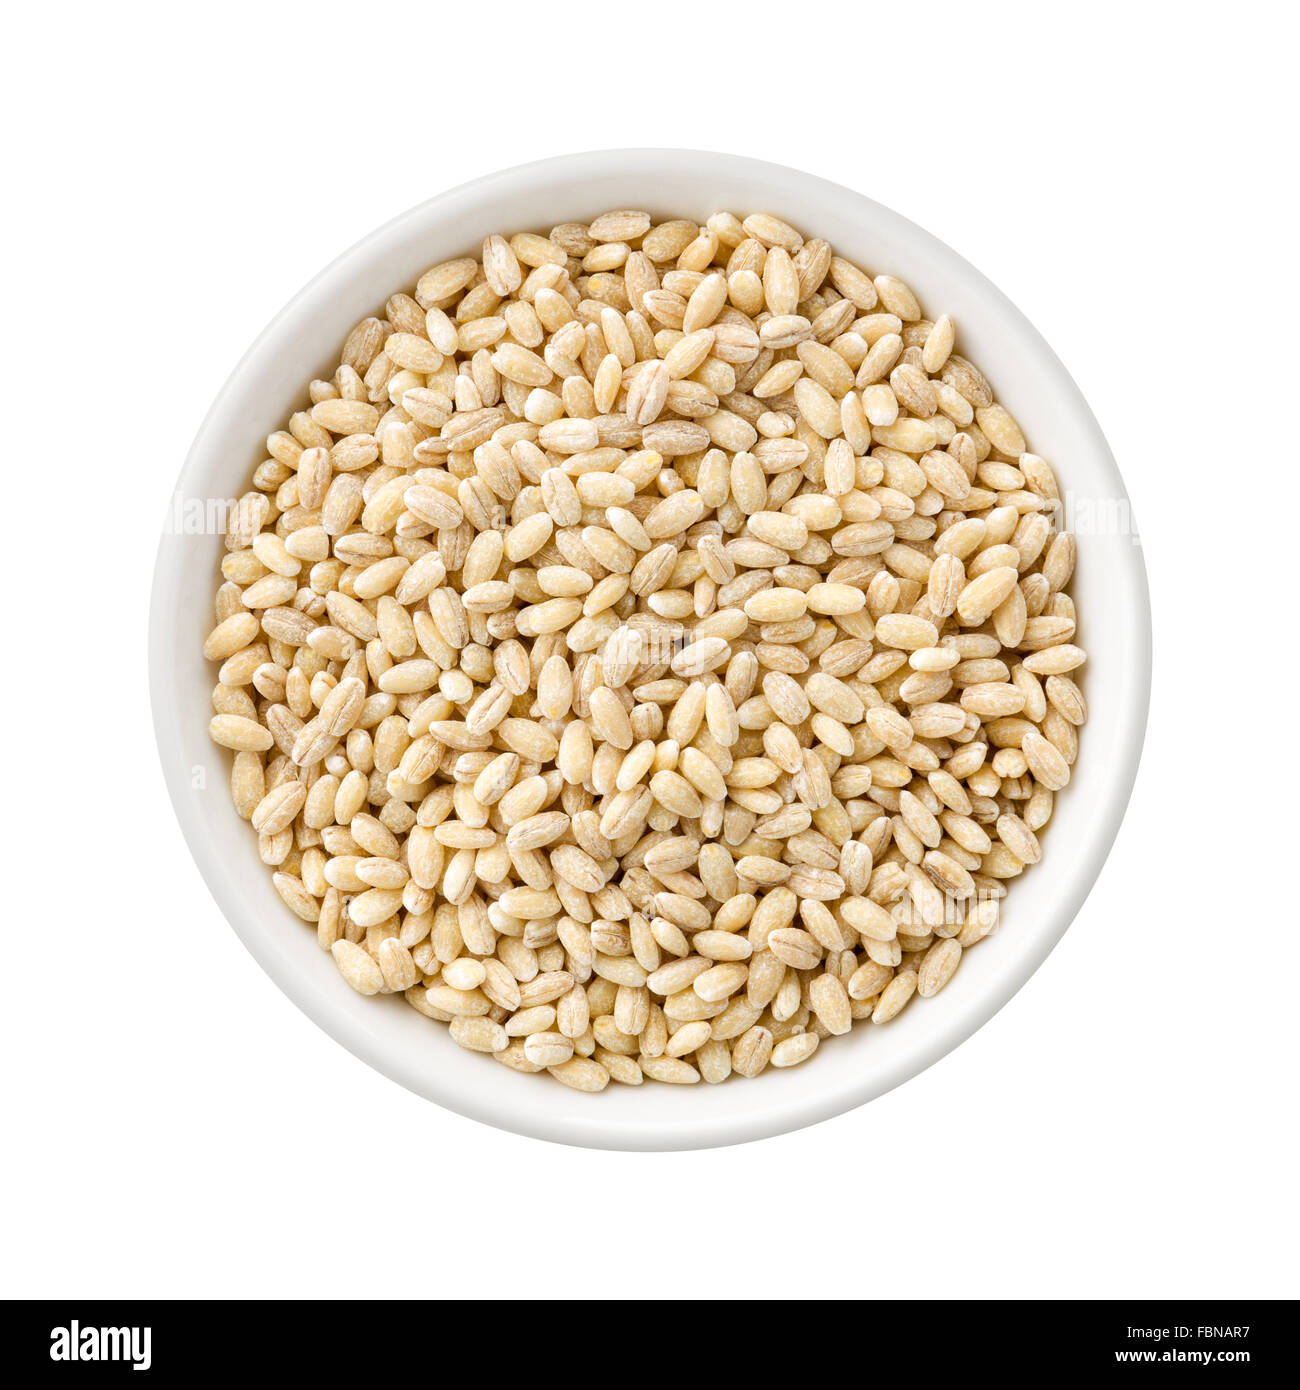 Overhead View of Uncooked Natural Pearled Barley Stock Photo